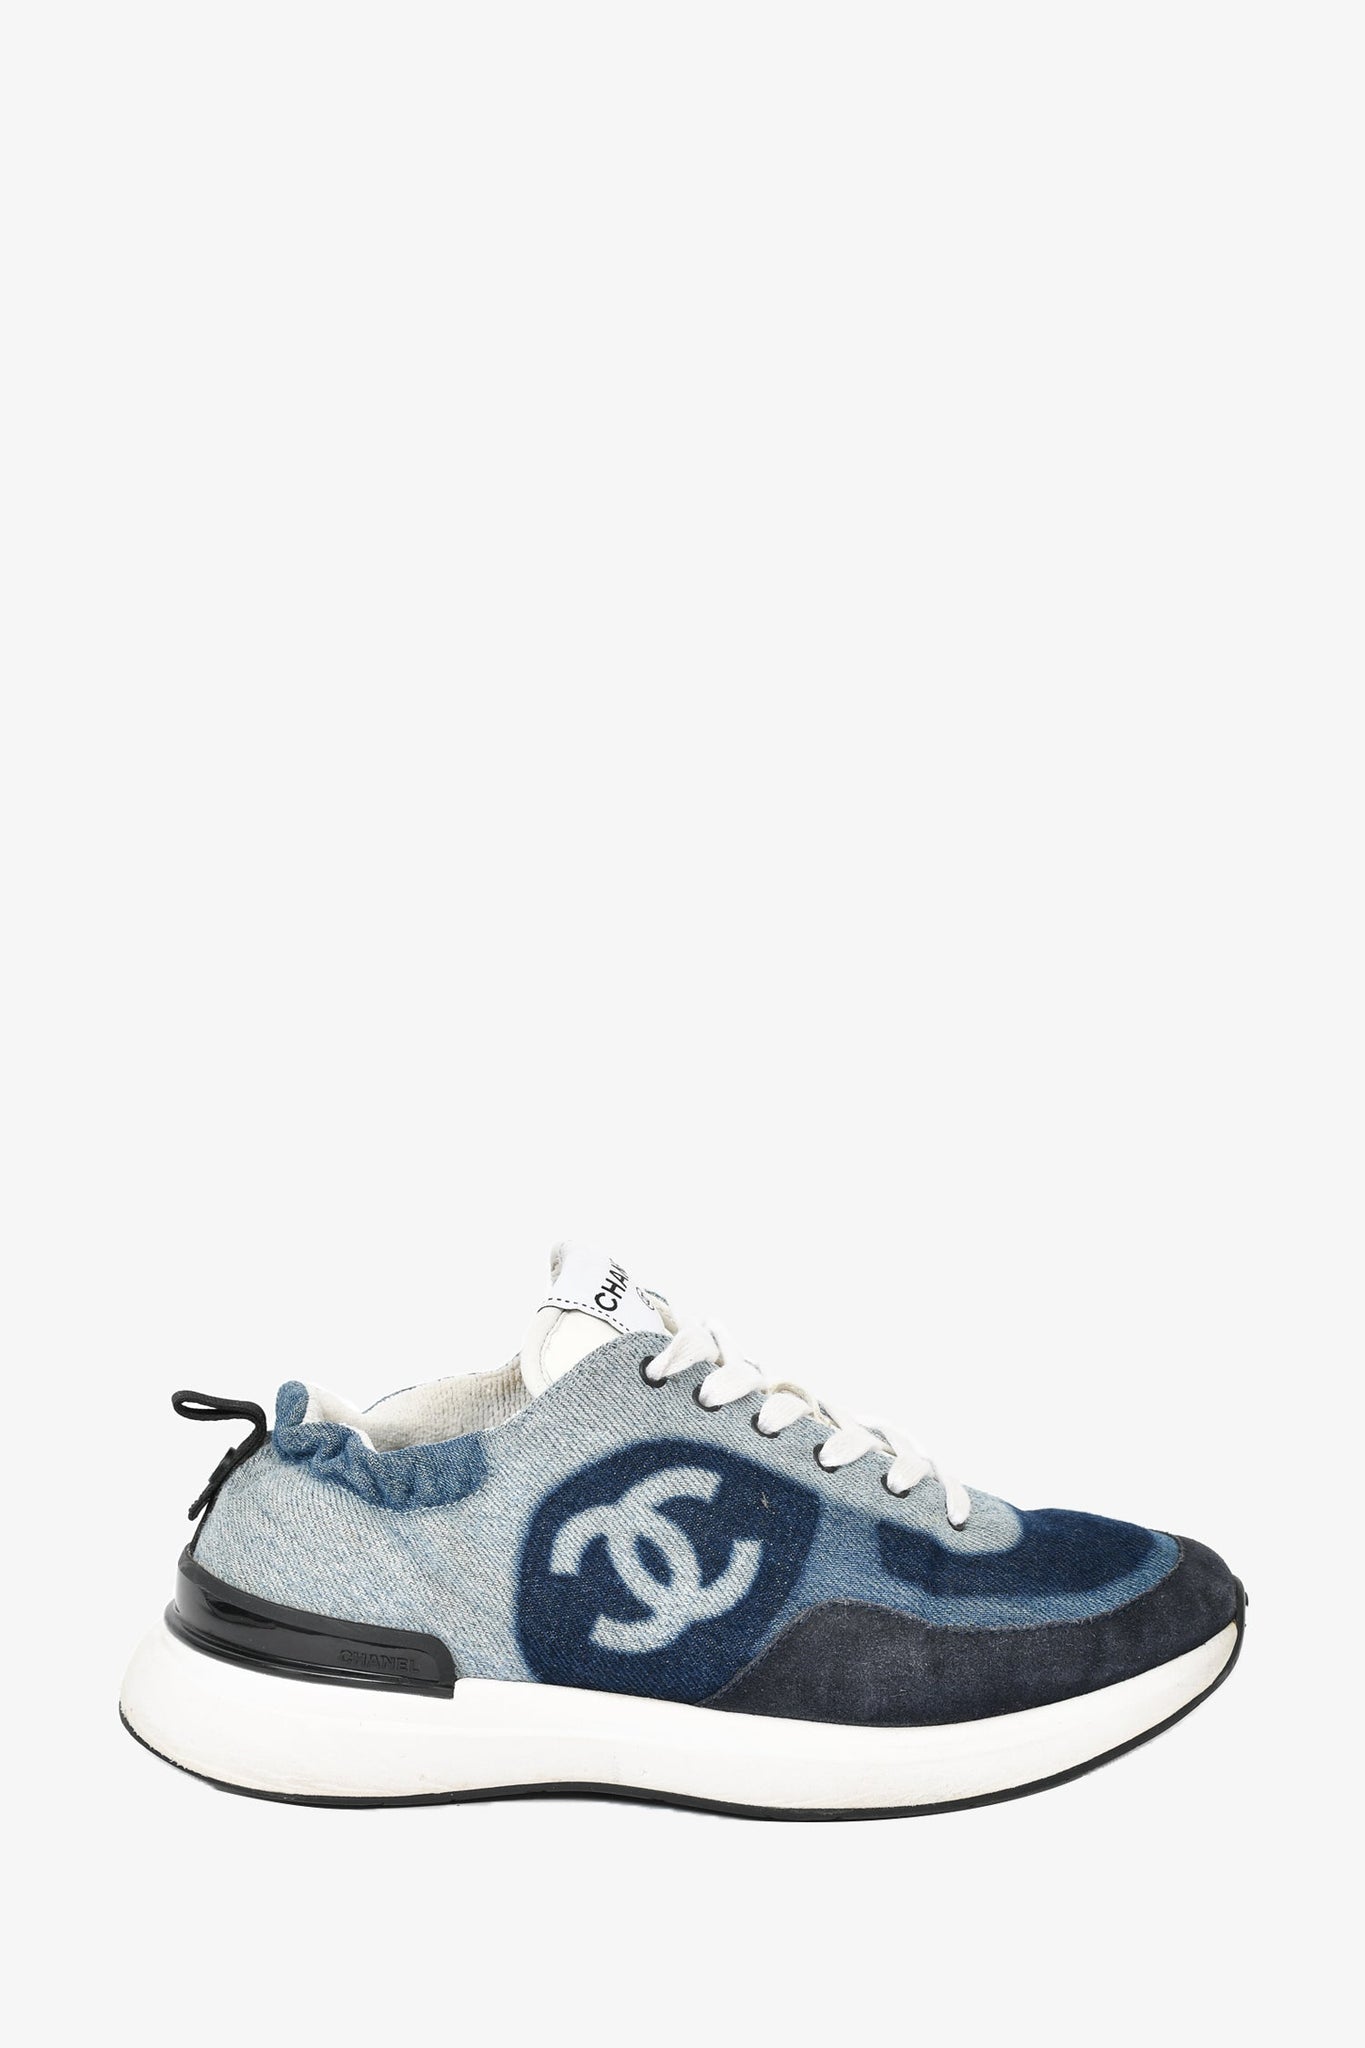 Chanel Denim 'CC' Logo Sneakers Size 38.5 – Mine & Yours